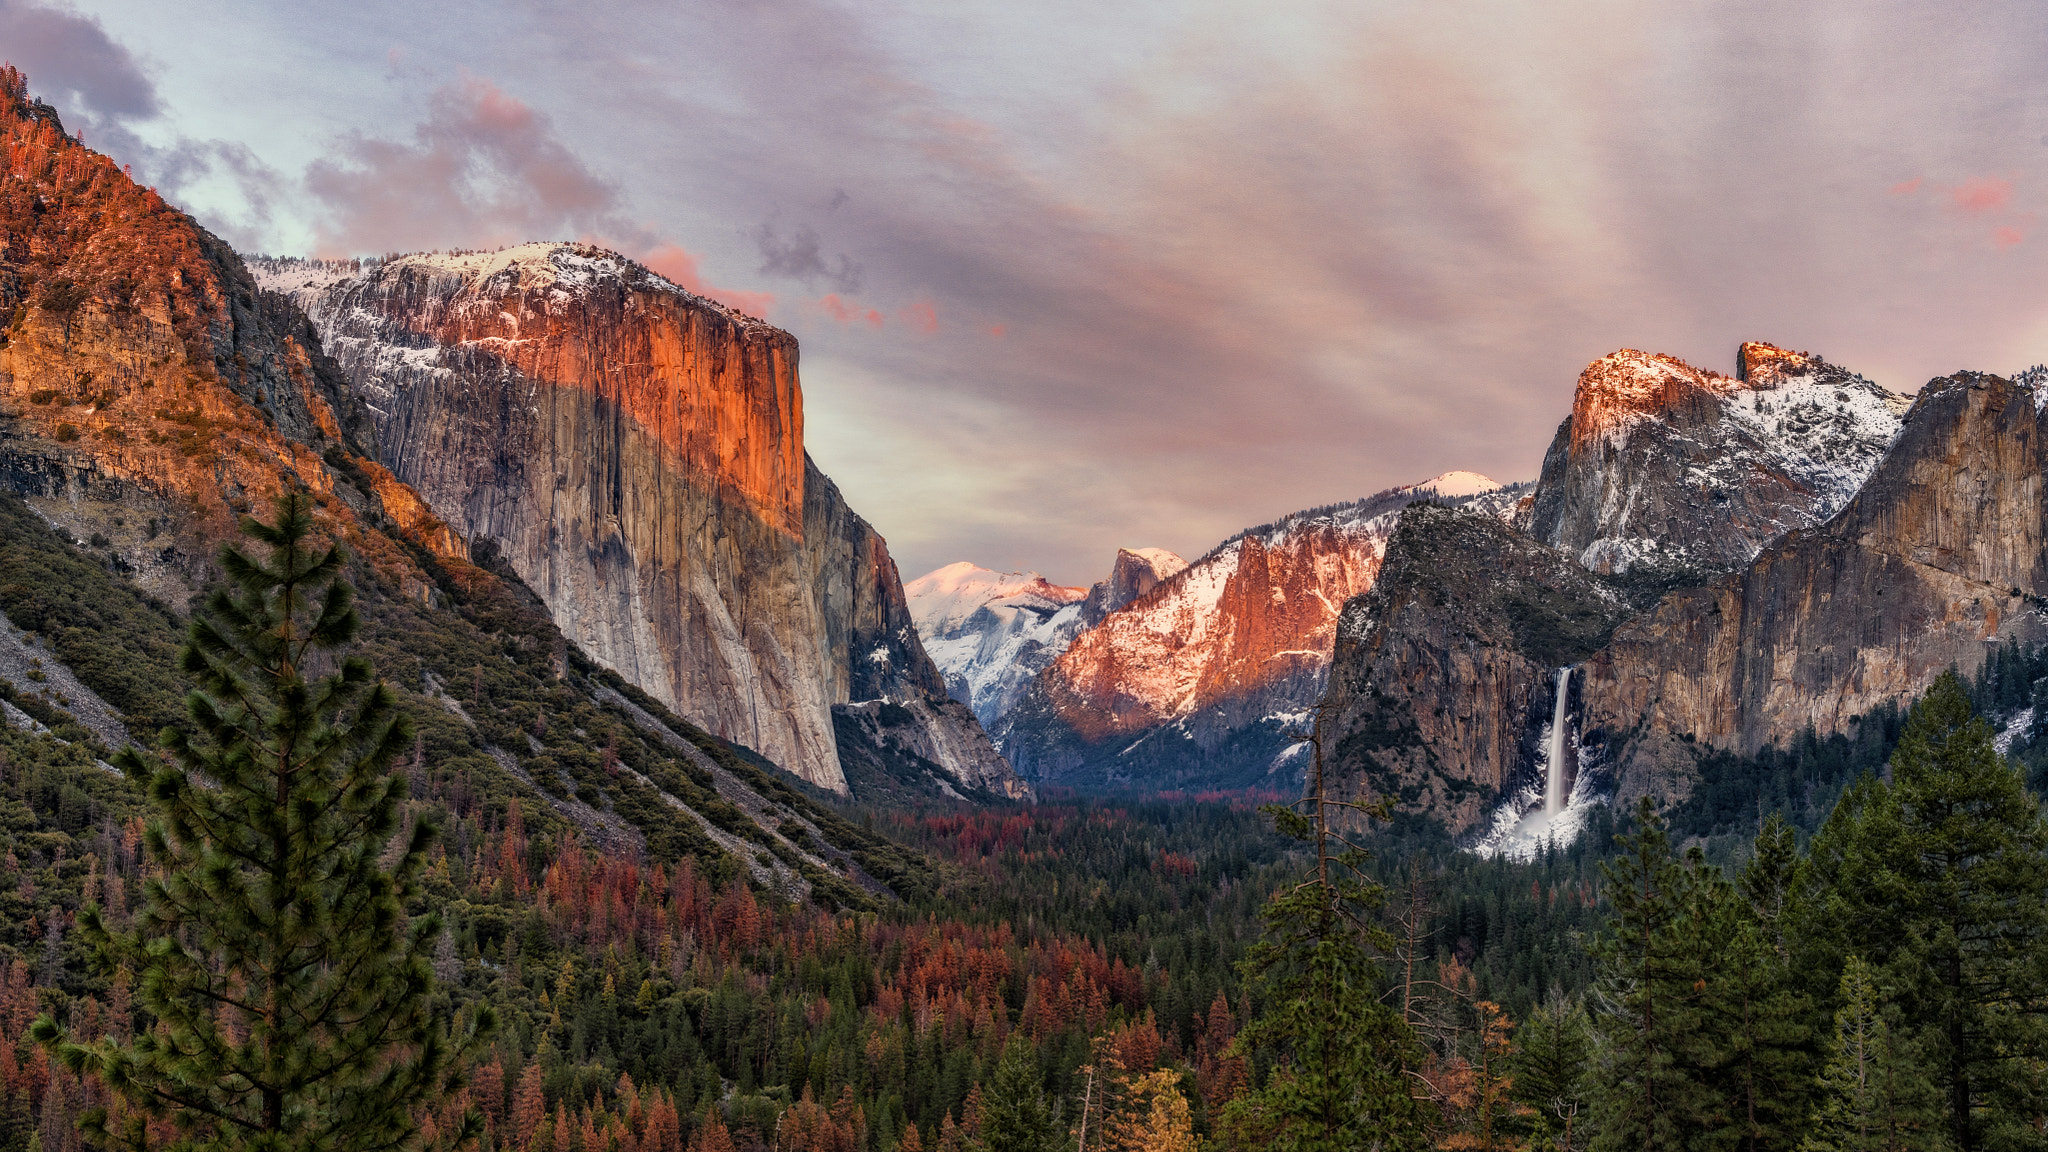 Sony a99 II sample photo. Tunnel view during winter sunset photography